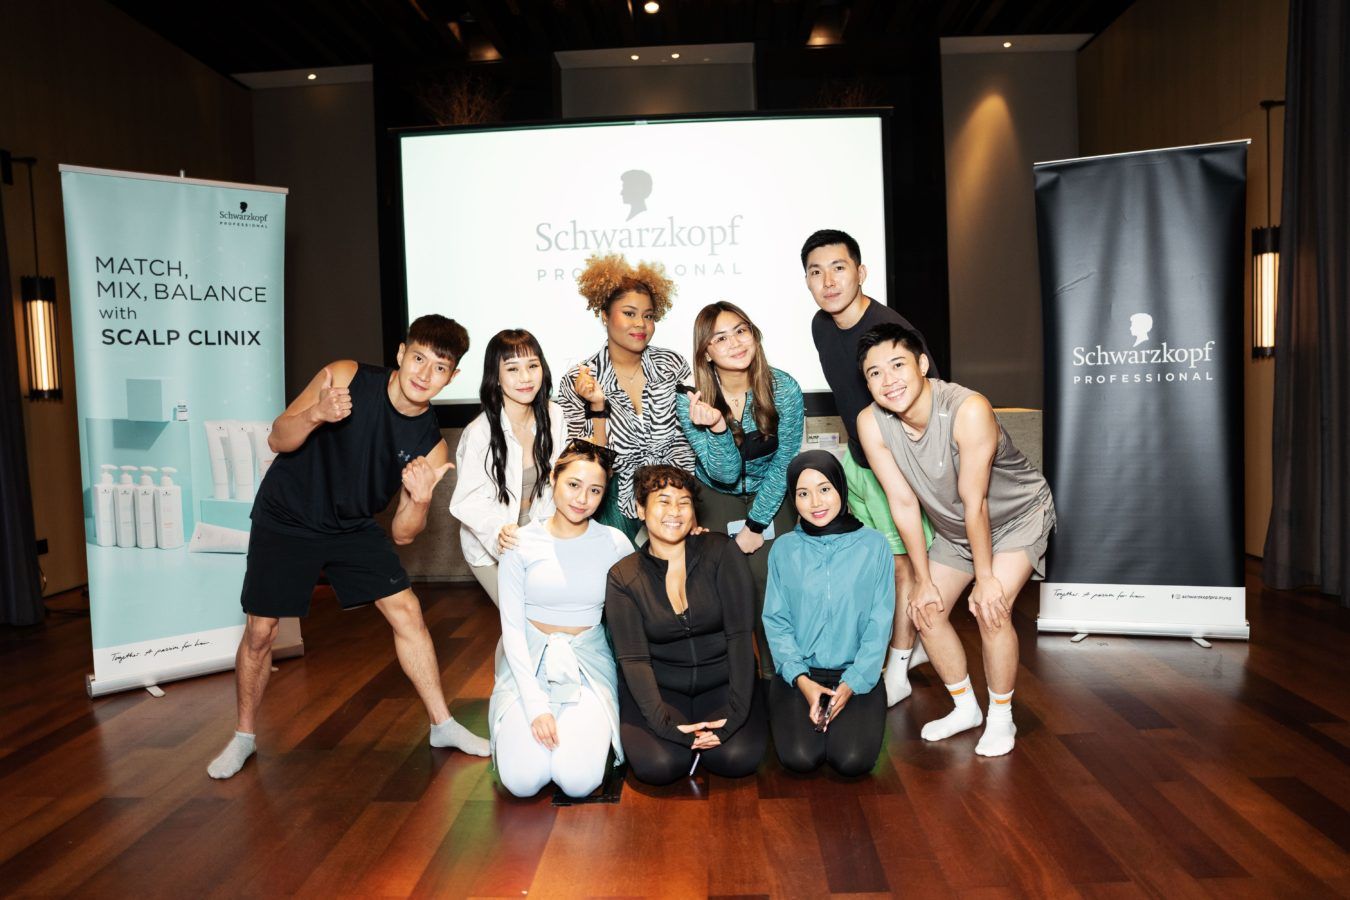 Schwarzkopf Professional hosts a rebalancing session that heals the mind, body and soul